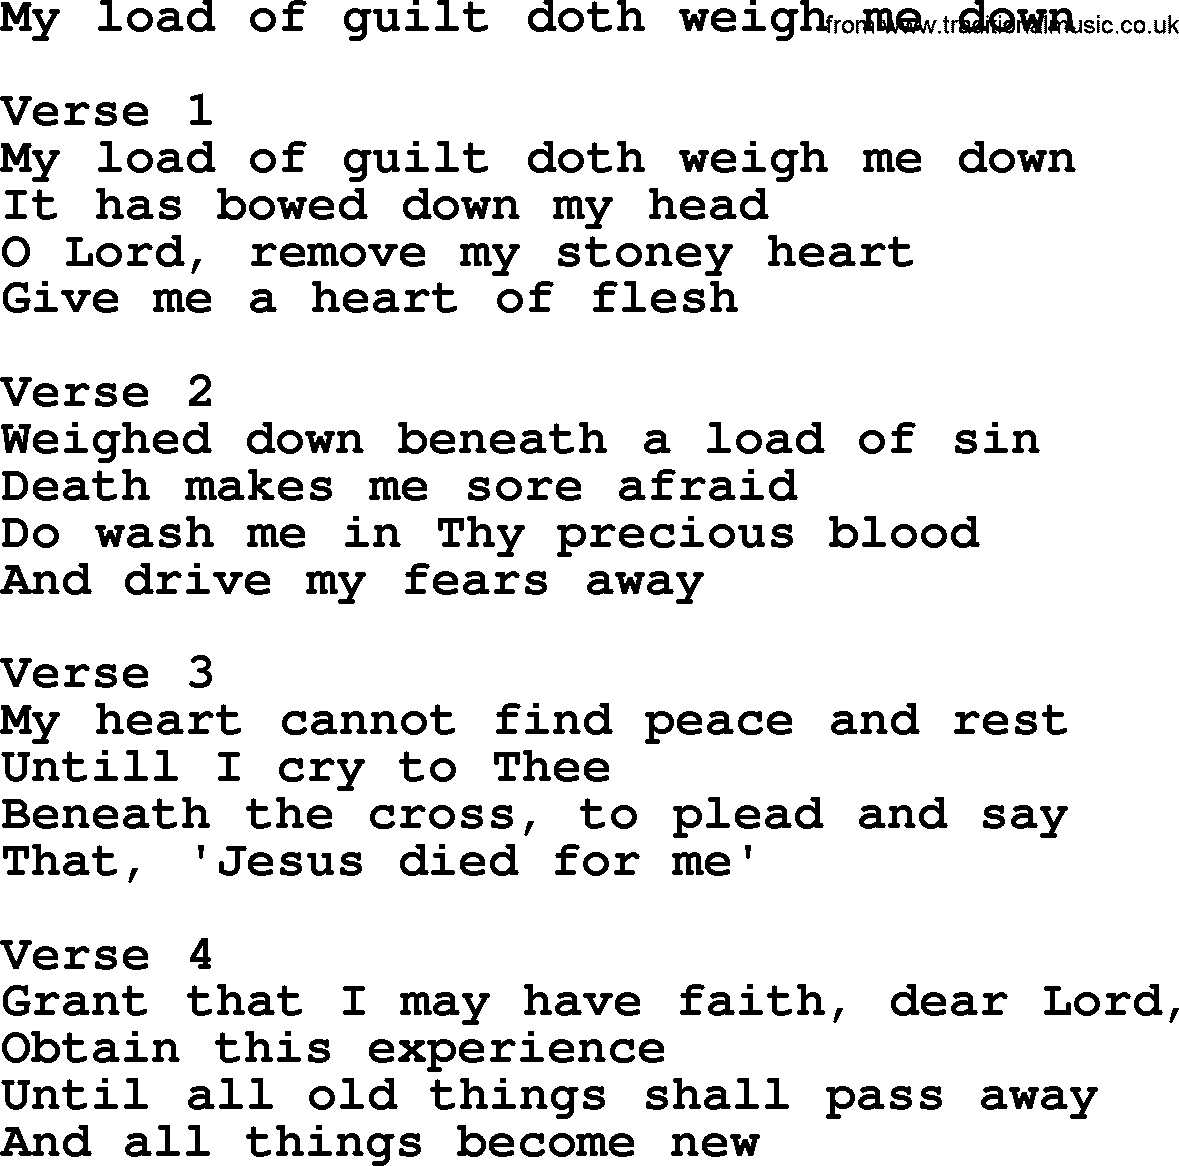 Apostolic and Pentecostal Hymns and Gospel Songs, Hymn: My Load Of Guilt Doth Weigh Me Down, Christian lyrics and PDF